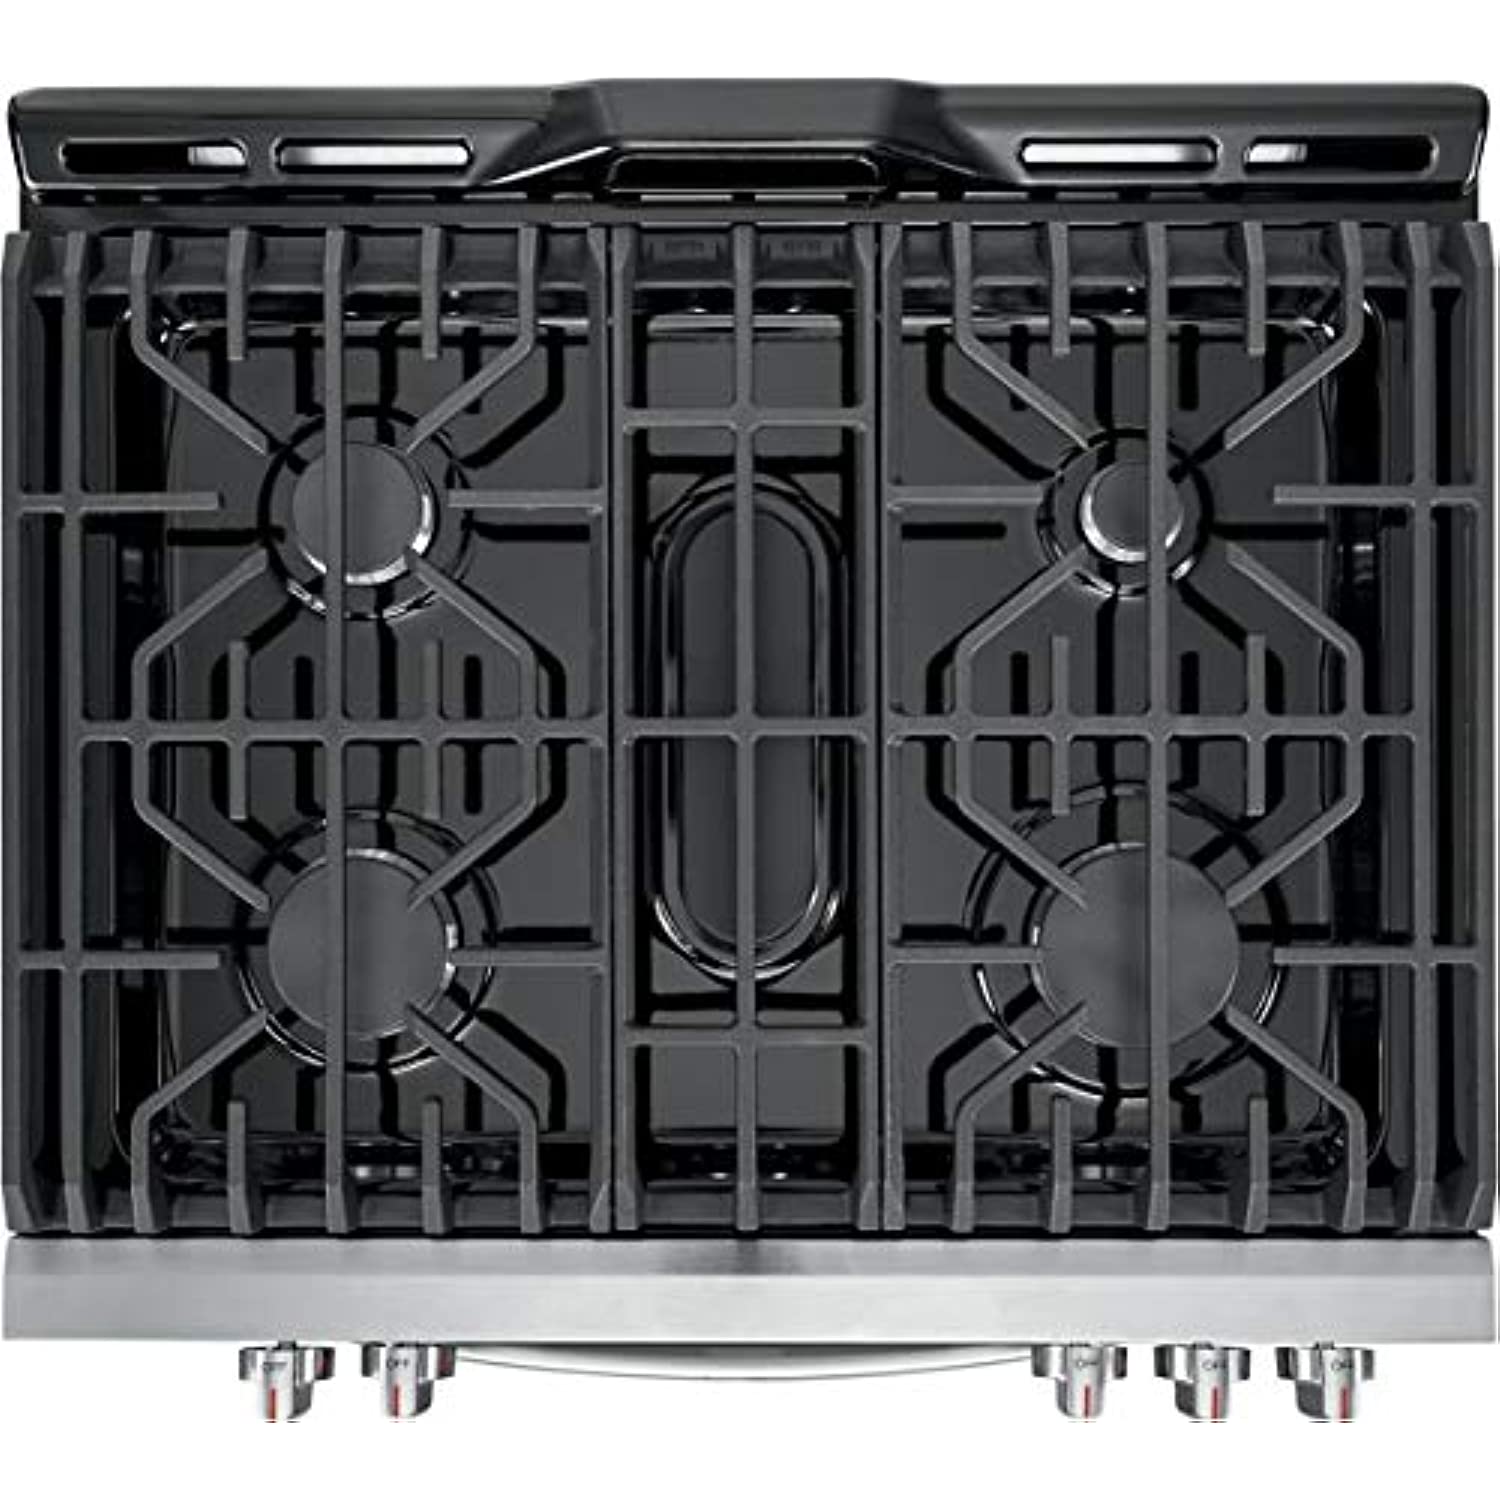 Frigidaire FGGH3047VF 30" Gallery Series Gas Range with 5 Sealed Burners, griddle, True Convection Oven, Self Cleaning, Air Fry Function, in Stainless Steel - image 4 of 10